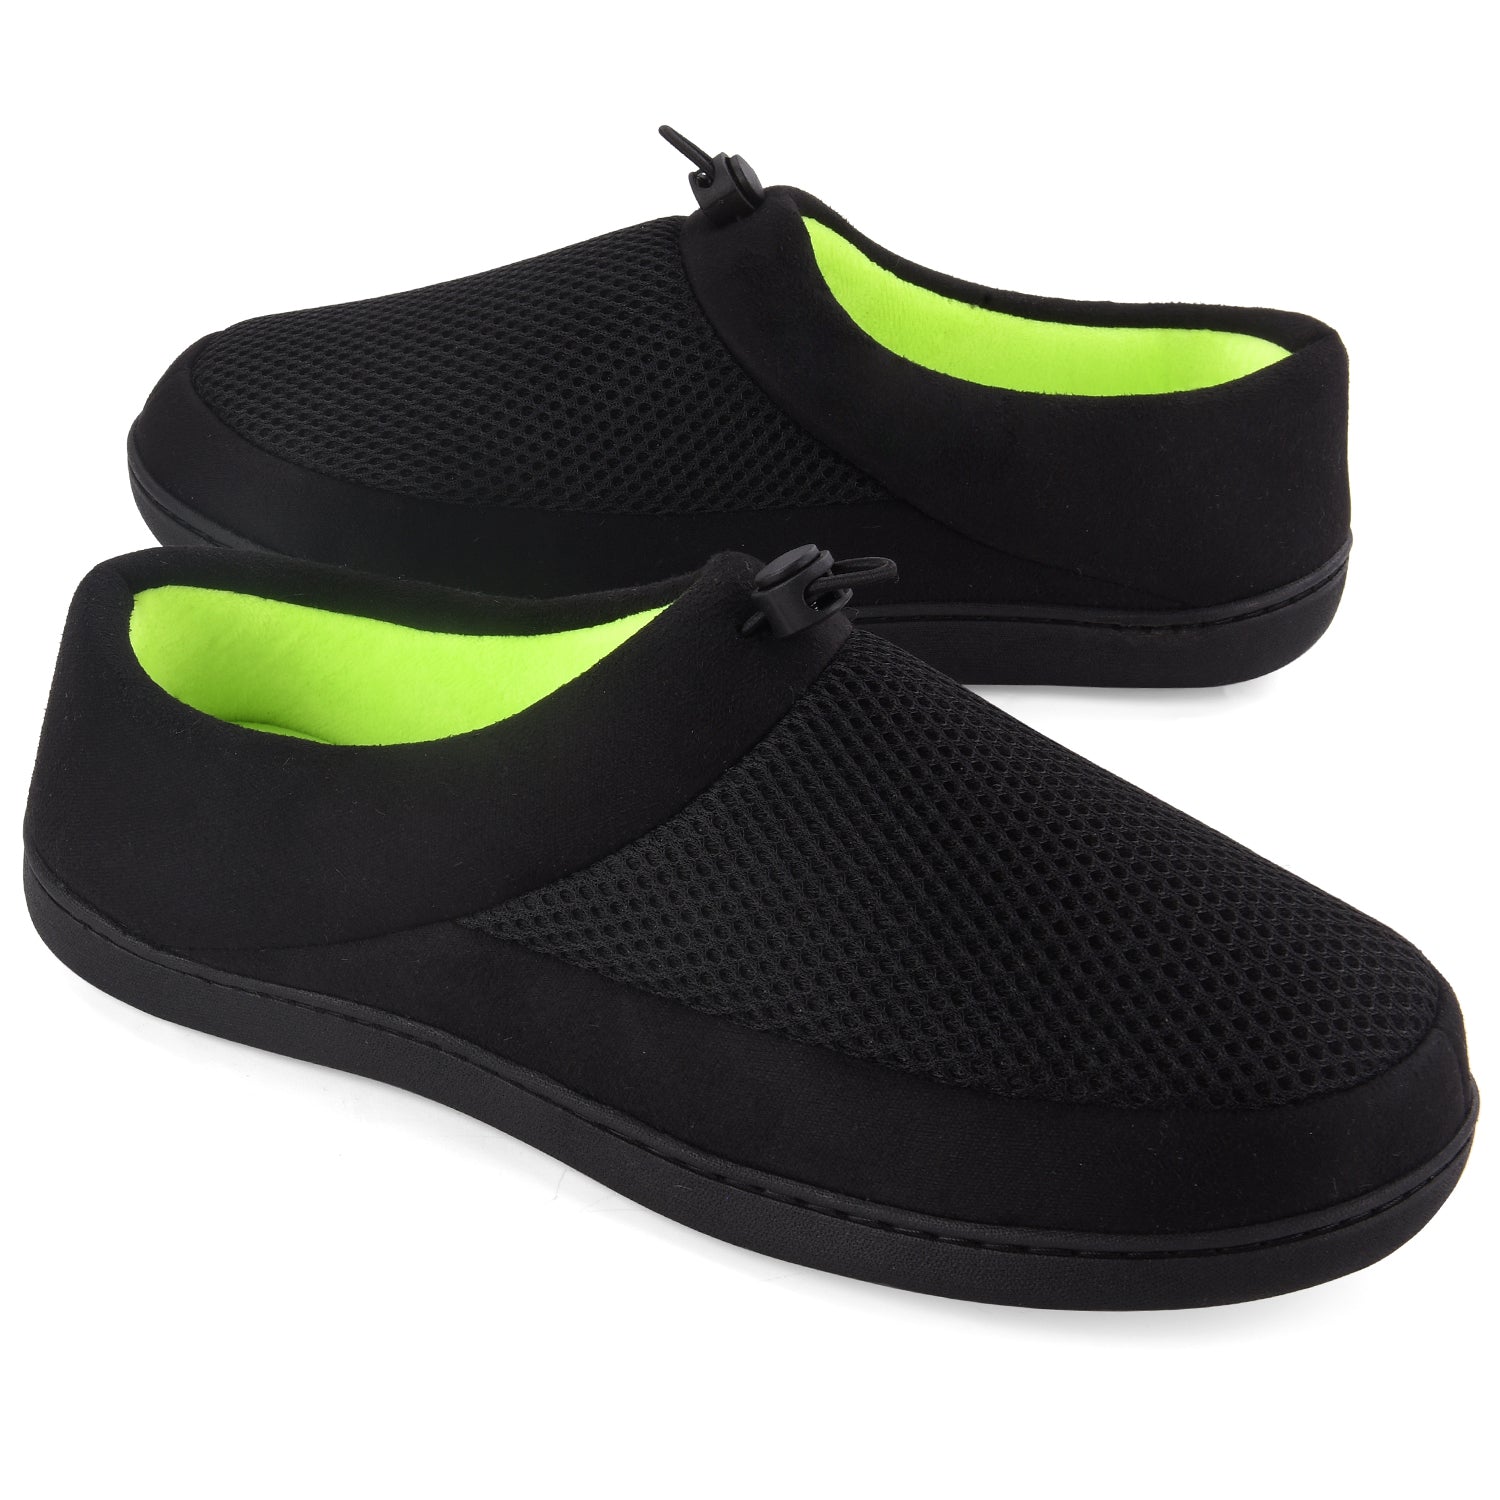 mens slippers for outdoor use